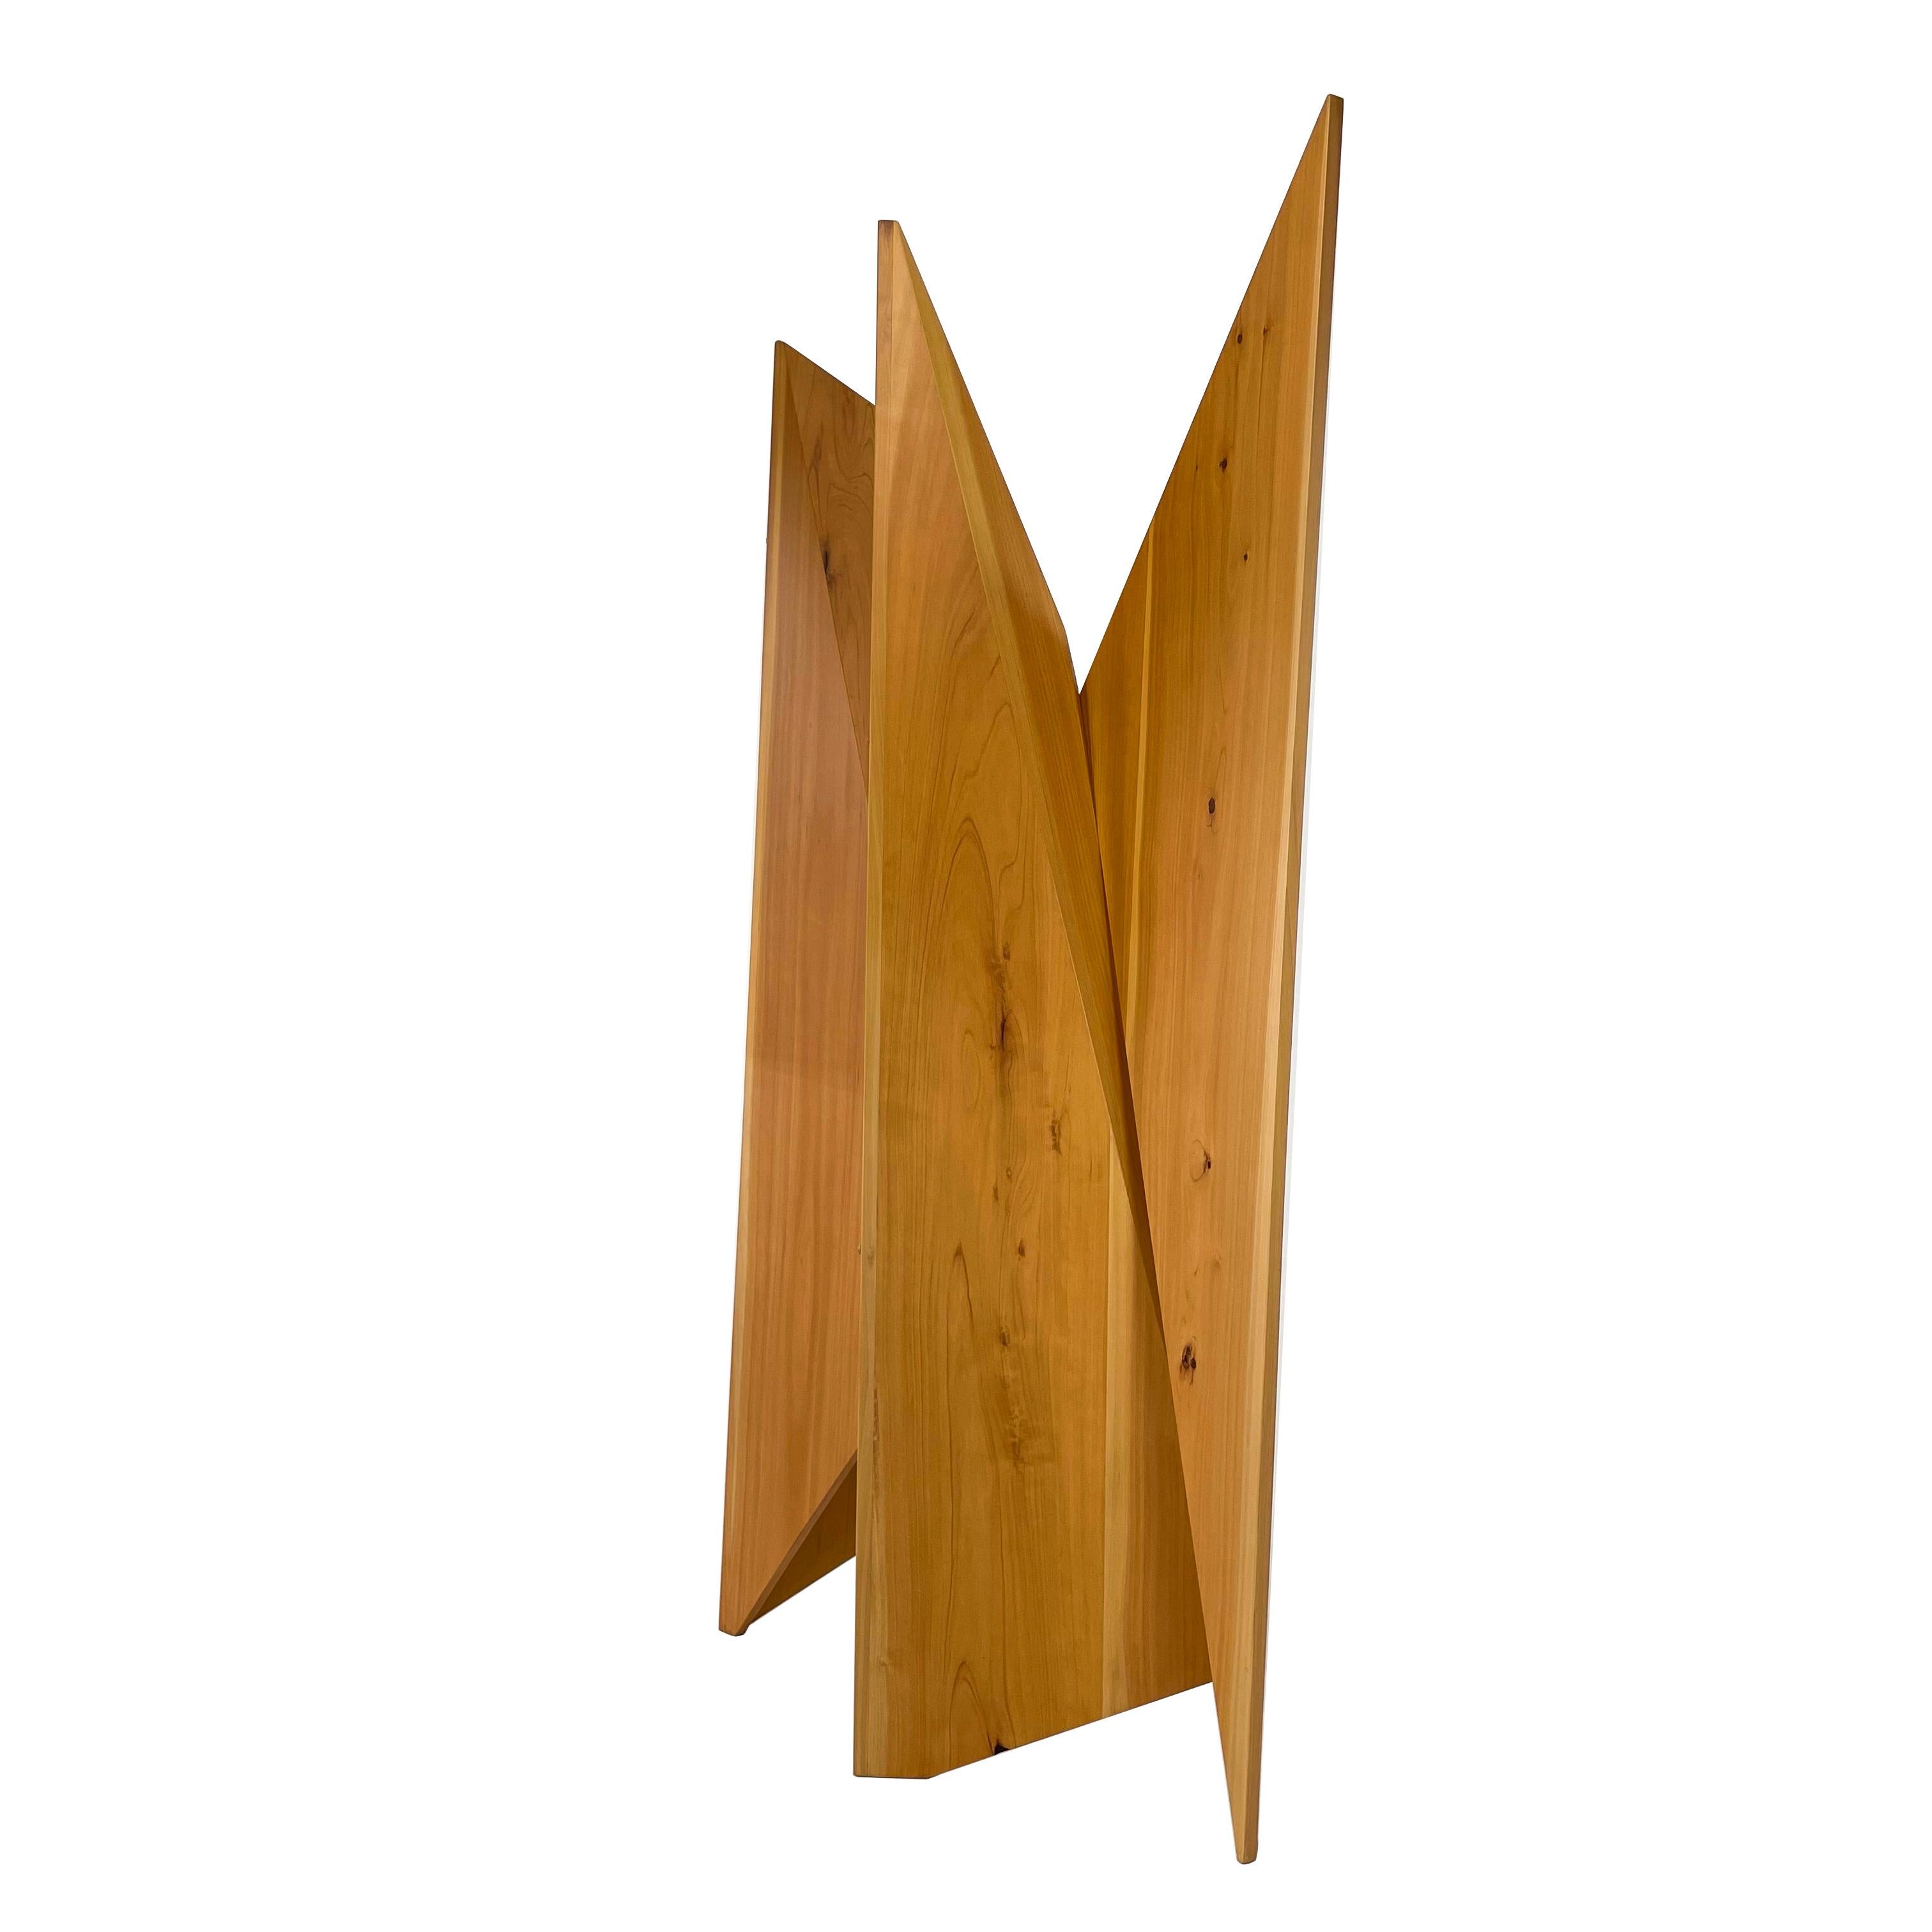 Contemporary Modern Wood Sculpture Wall Screen / Room Divider by Pierre Sarkis For Sale